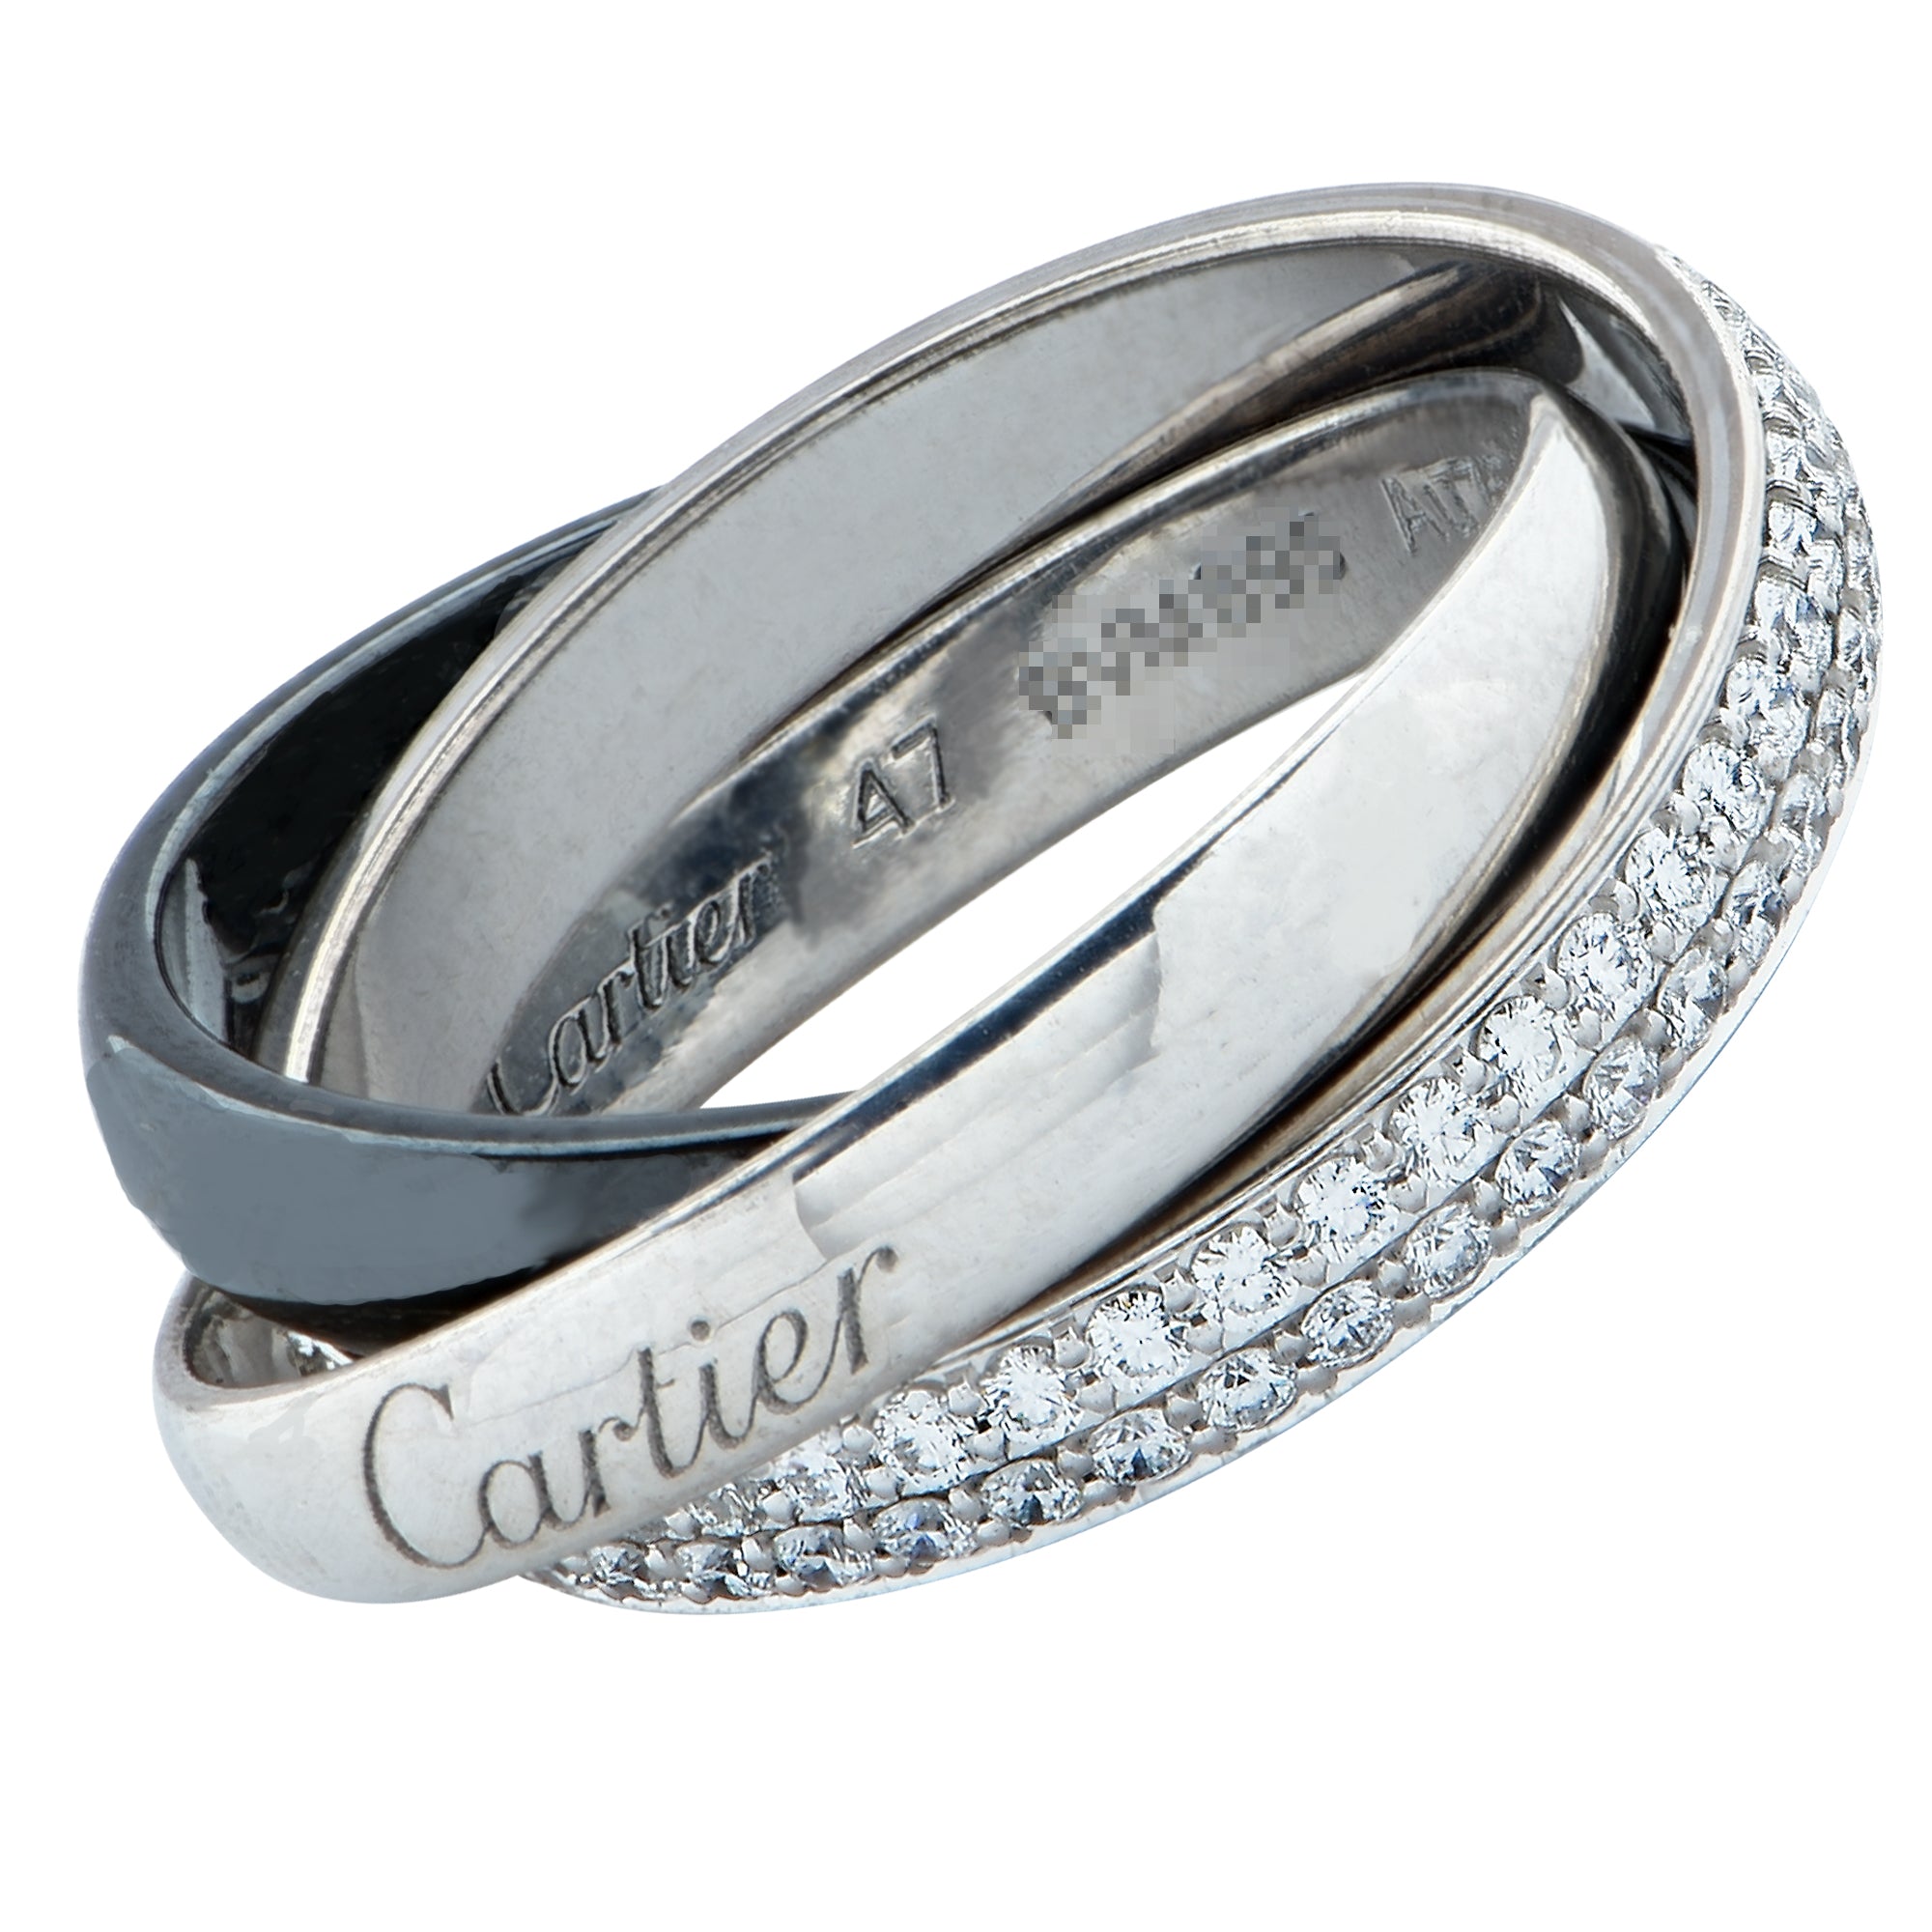 Cartier 18K White Gold Trinity Ring – Vintage by Misty